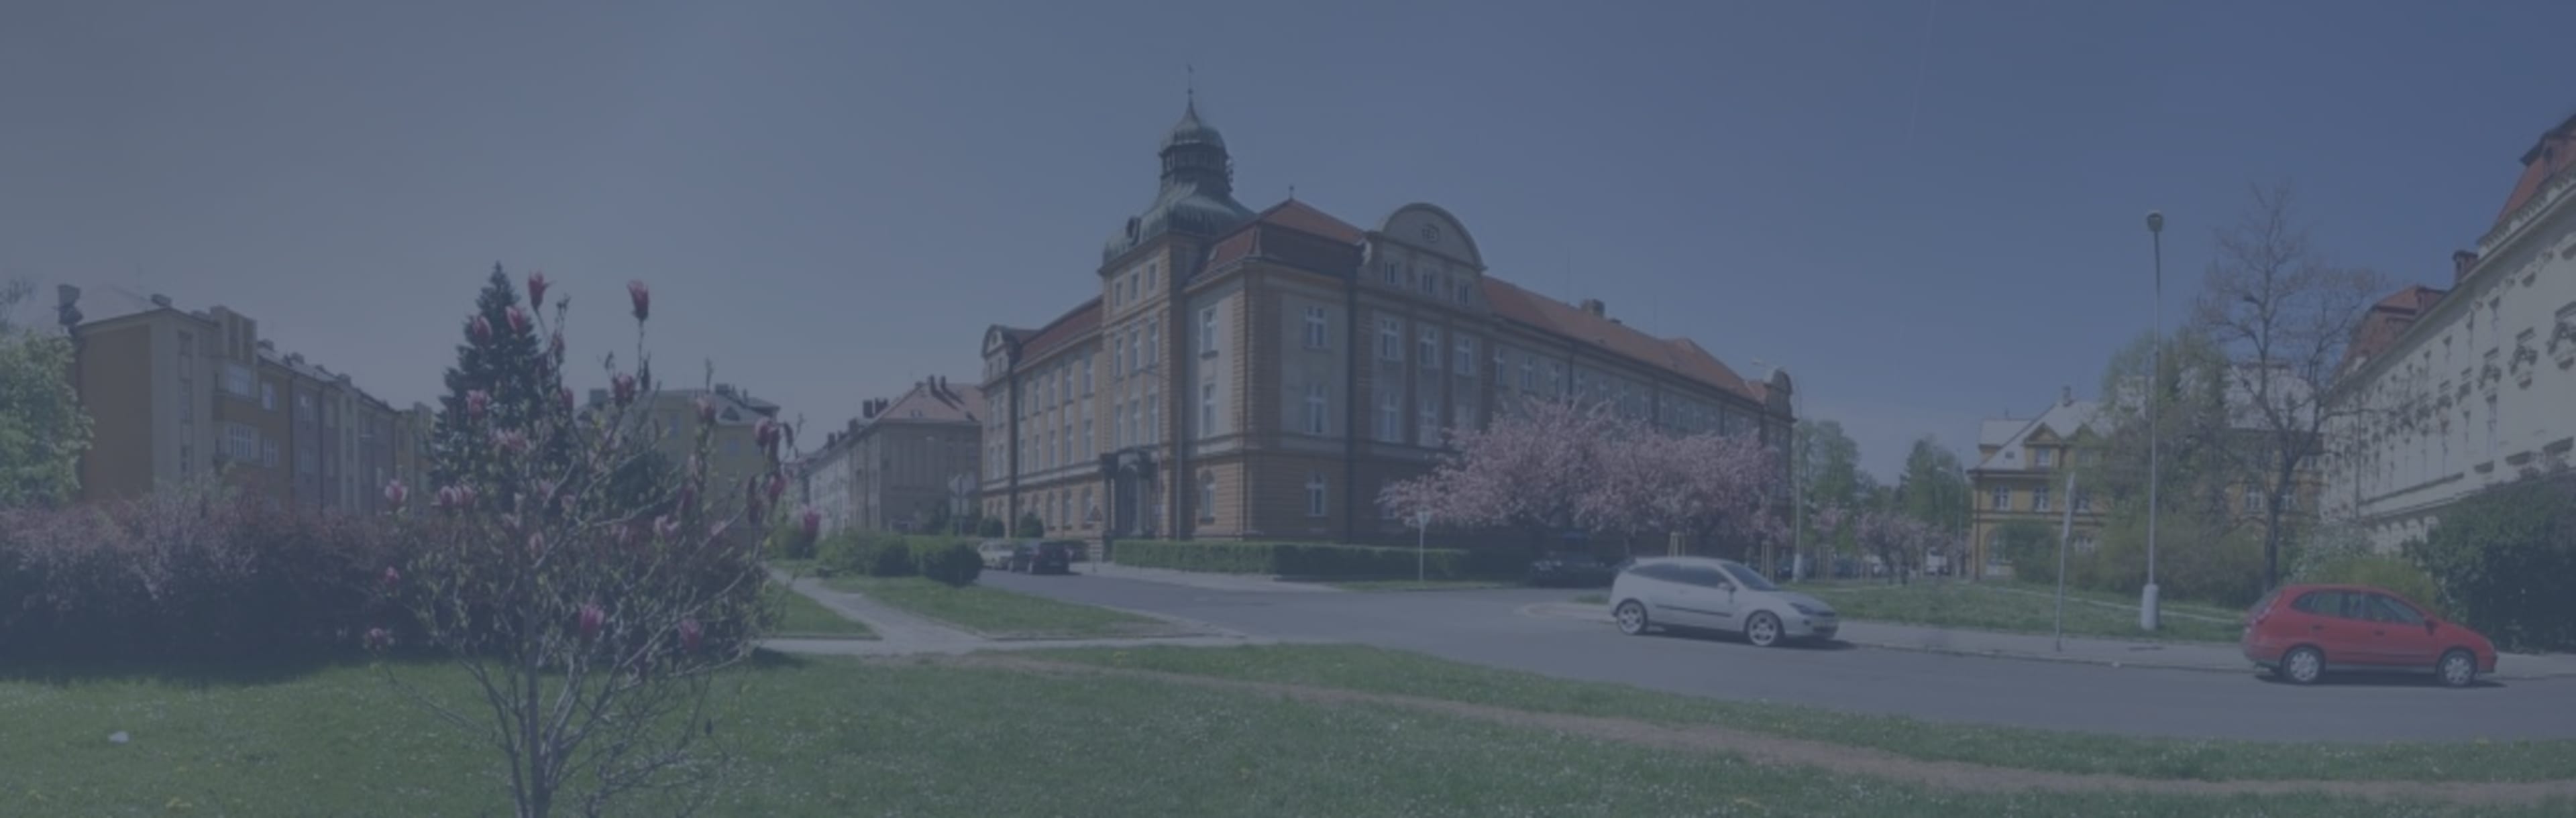 Faculty of Philosophy and Science, Silesian University in Opava